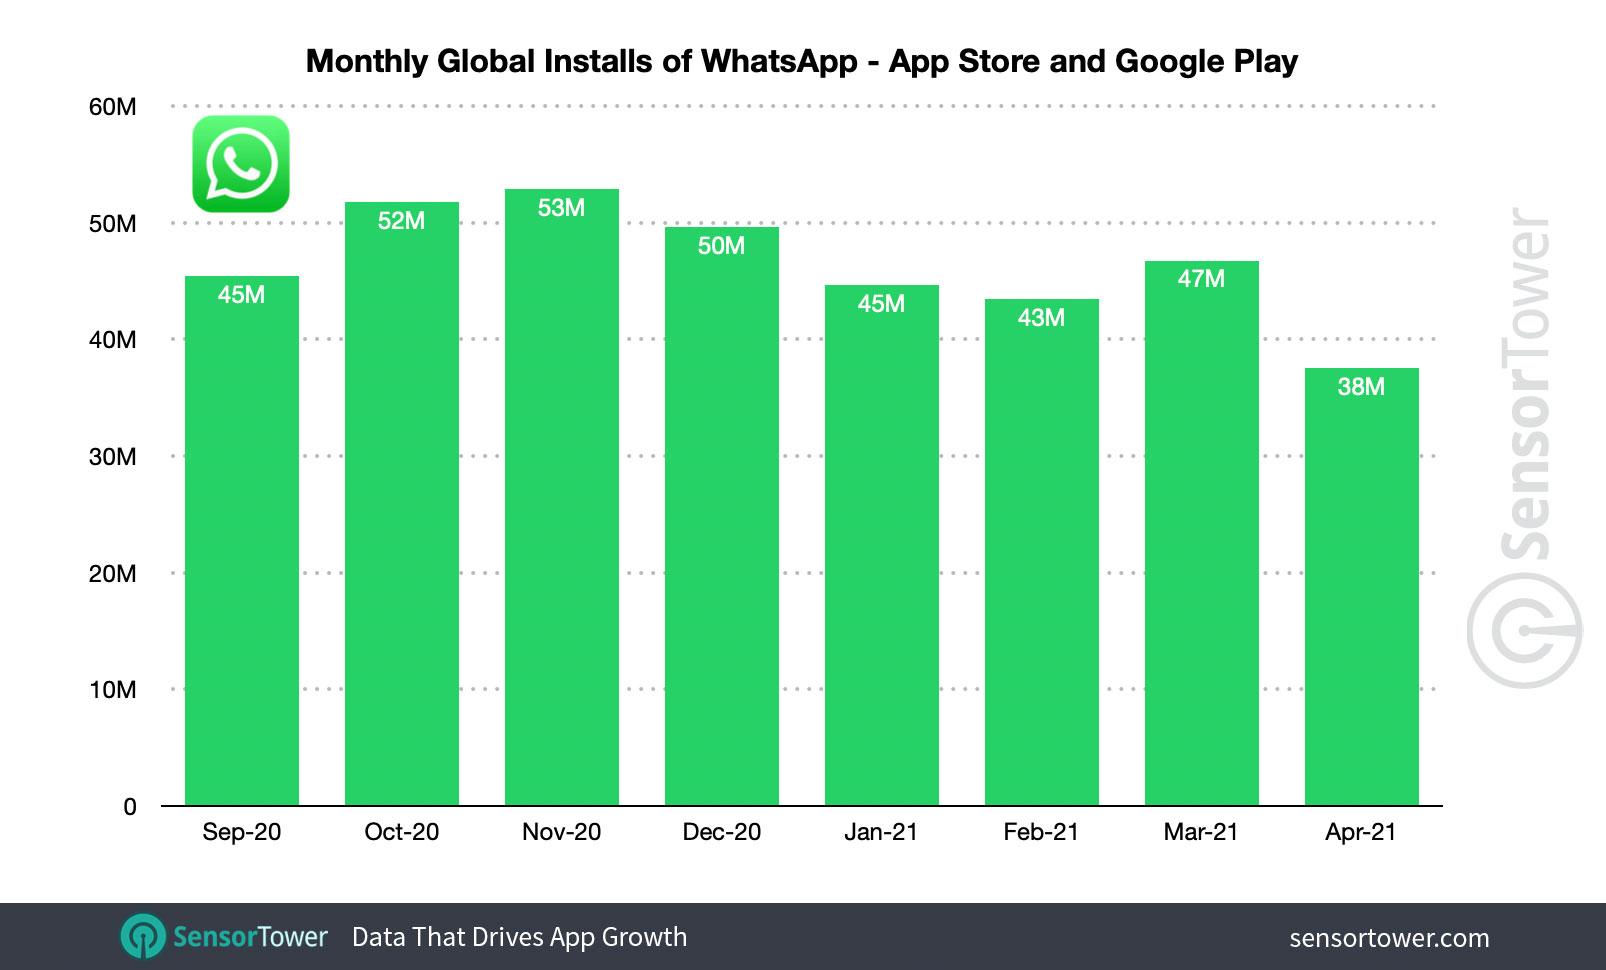 WhatsApp's installs saw a decline during the COVID-19 pandemic, and again after the company announced its new privacy policy.